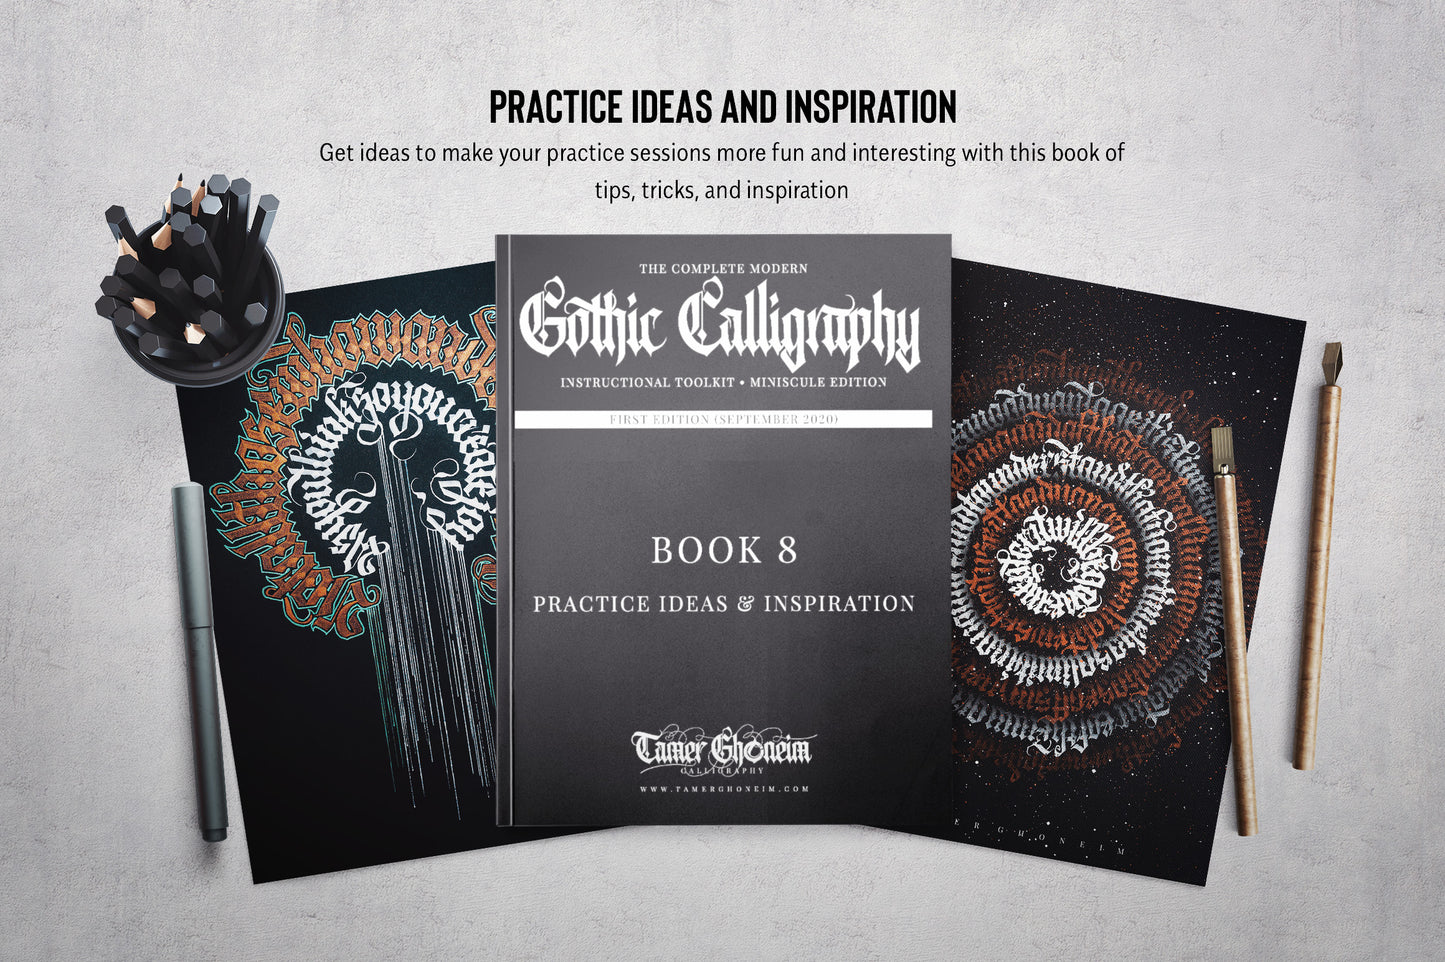 The Modern Gothic Calligraphy Instructional Toolbox (Lowercase Alphabet Edition)